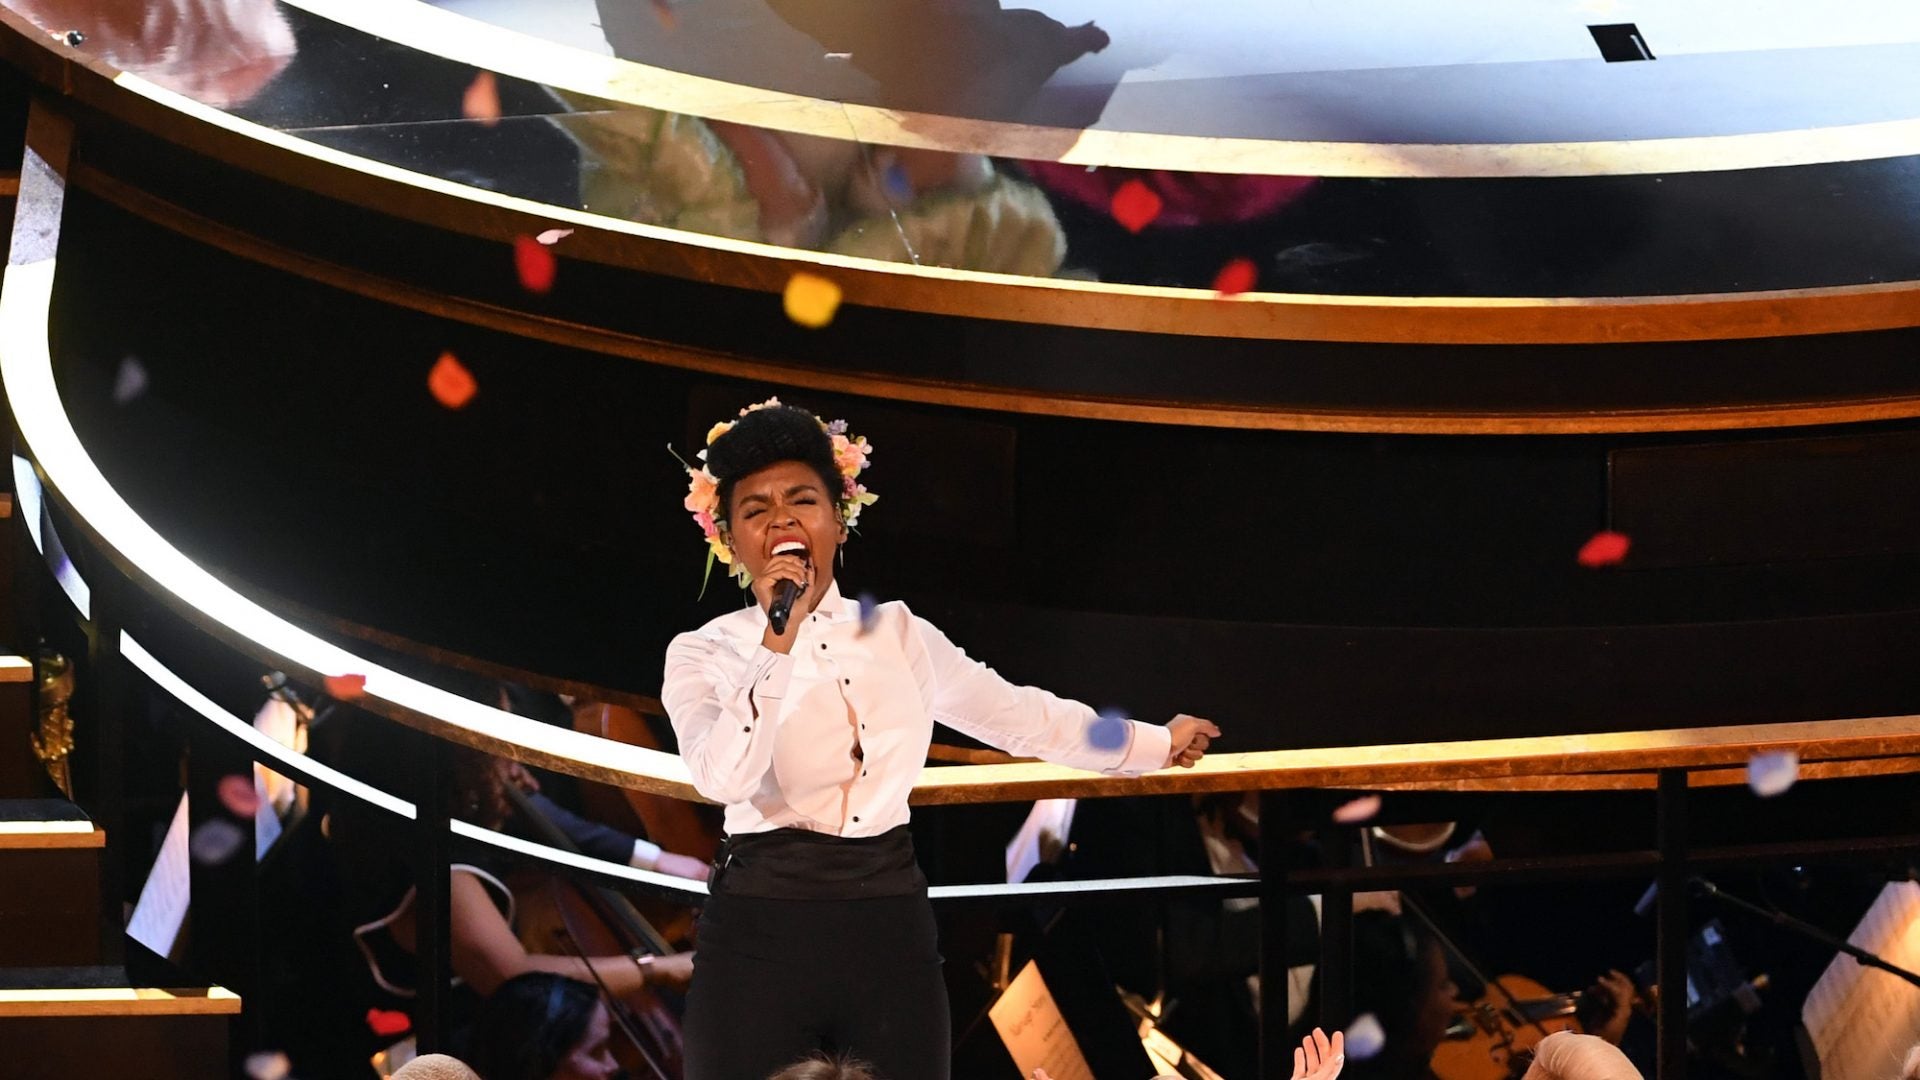 Janelle Monáe Opened The Oscars With A Show-Stopping Homage To The Year's Best Films